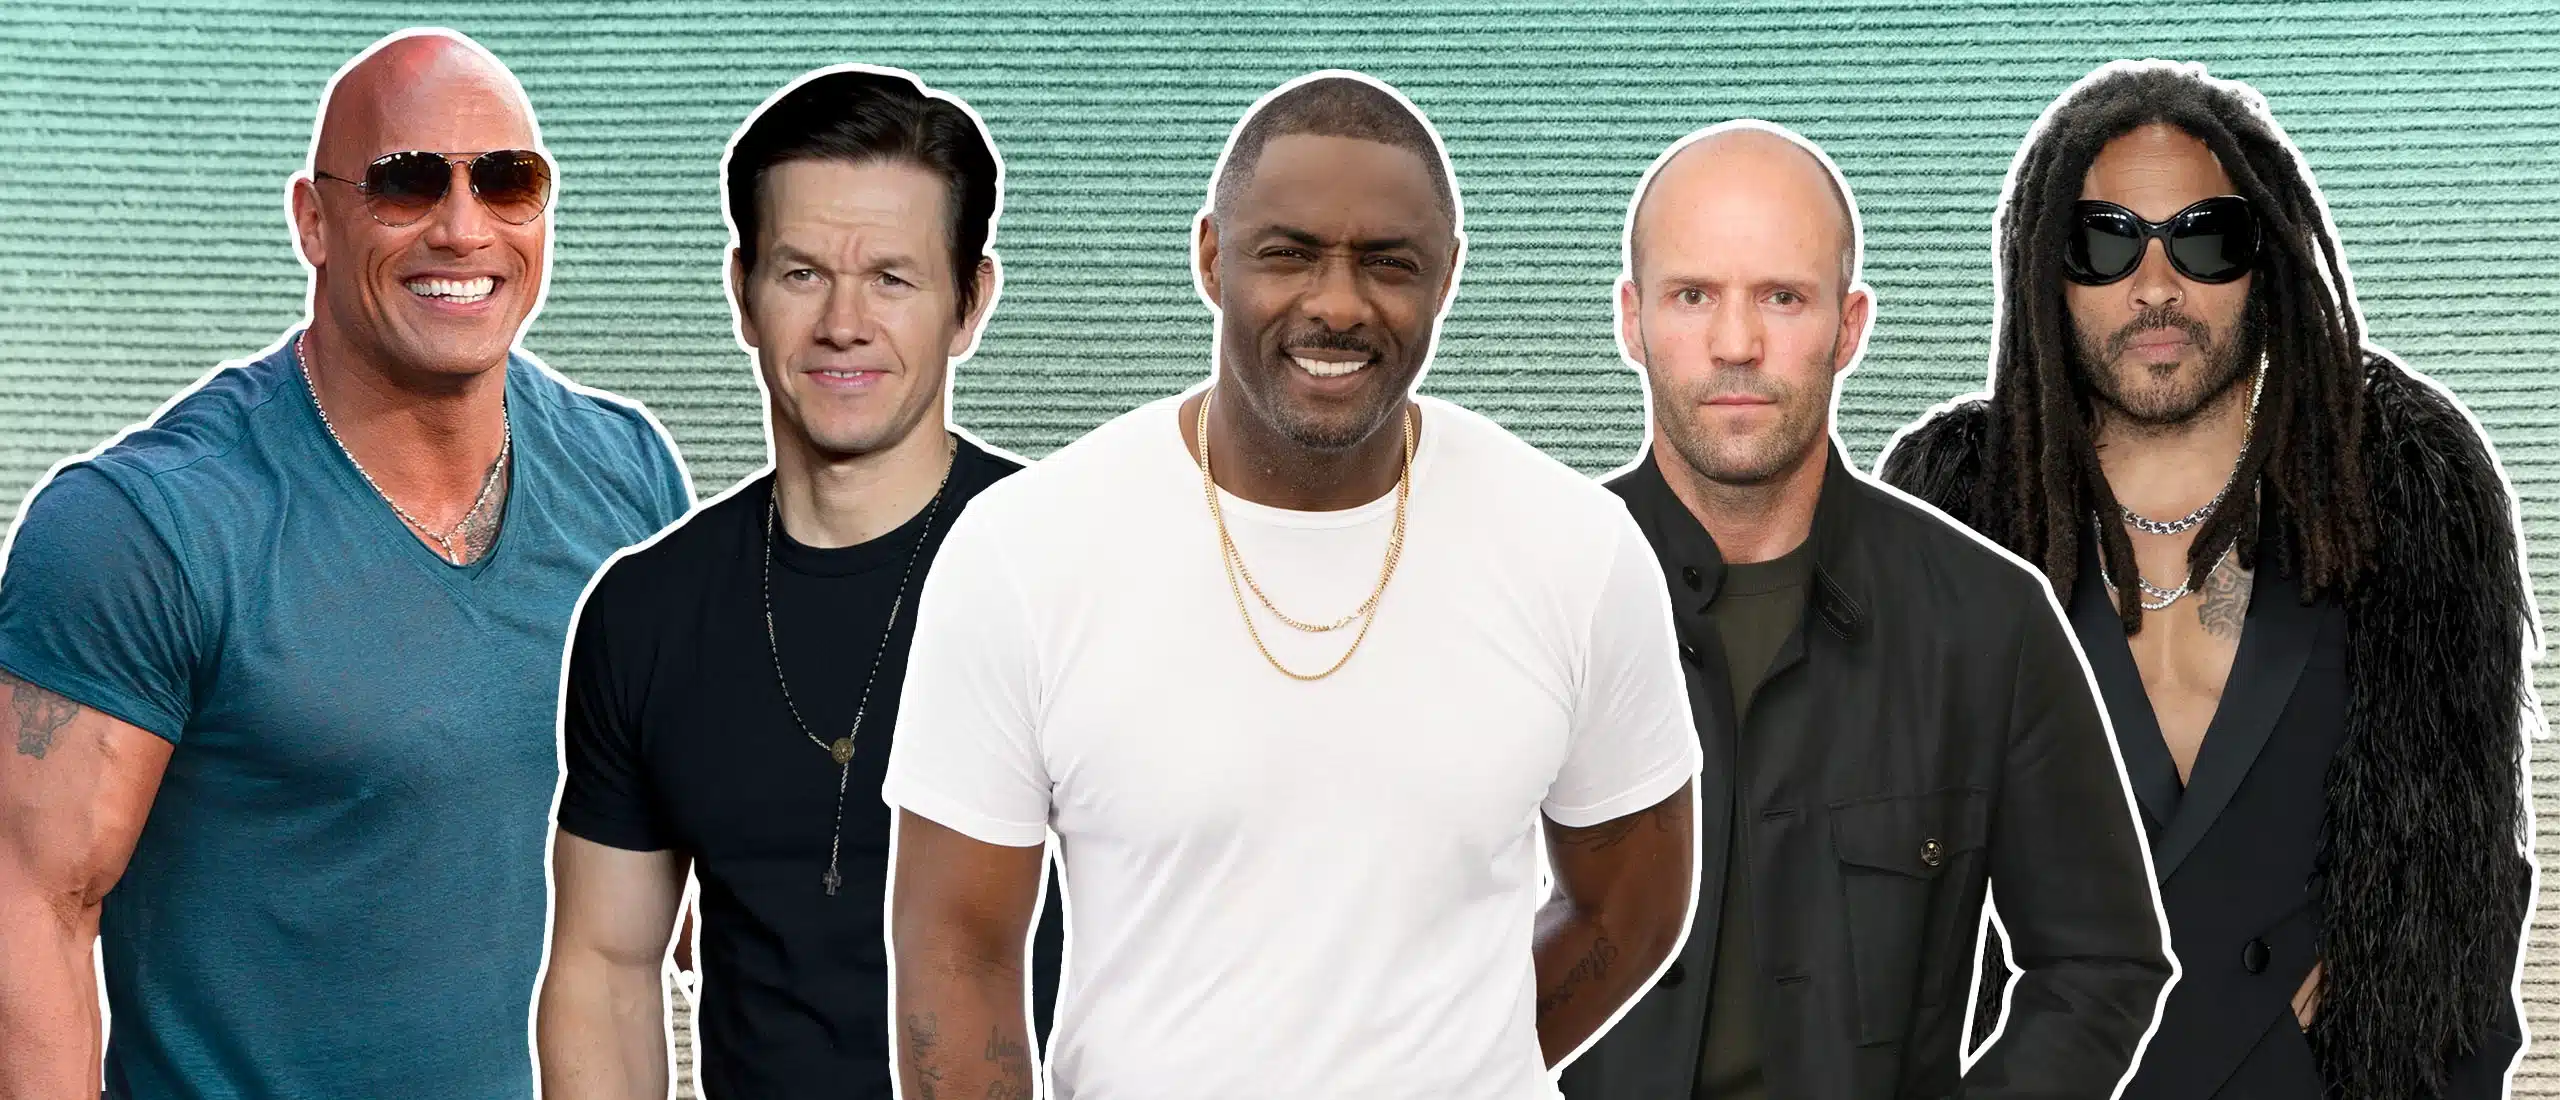 A picture of five male celebrities over 50